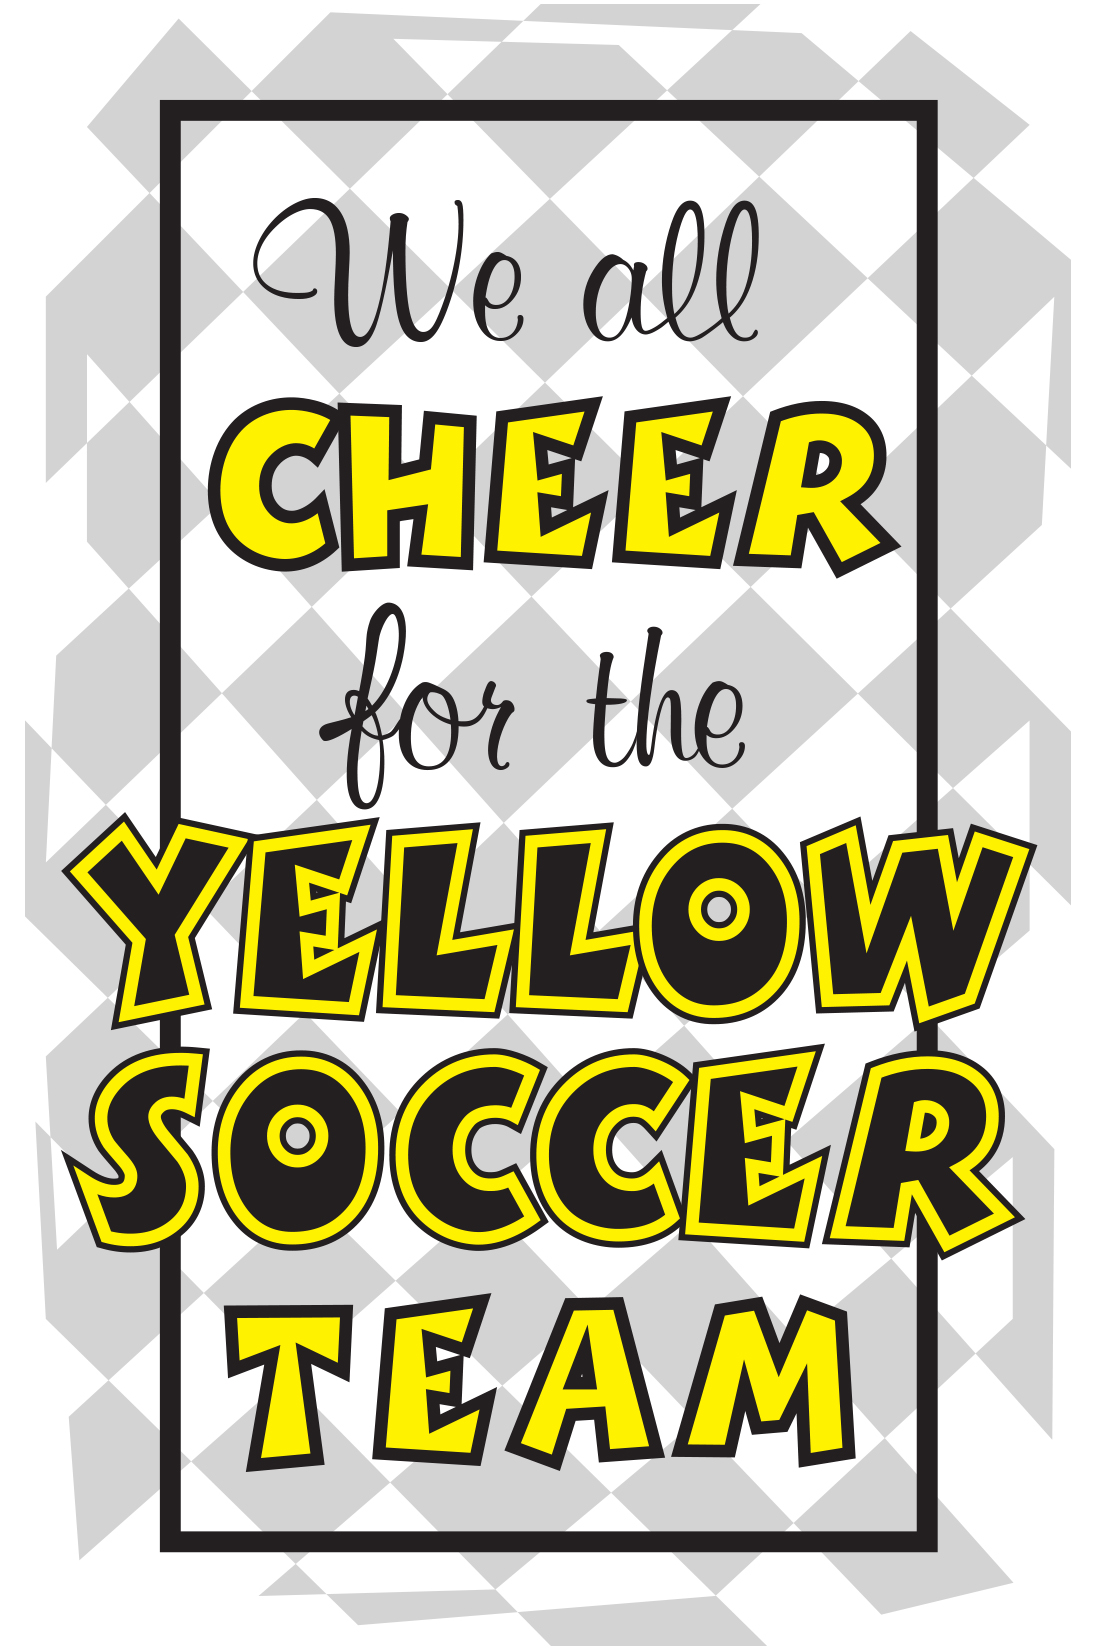 We all Cheer for the Yellow Soccer Team